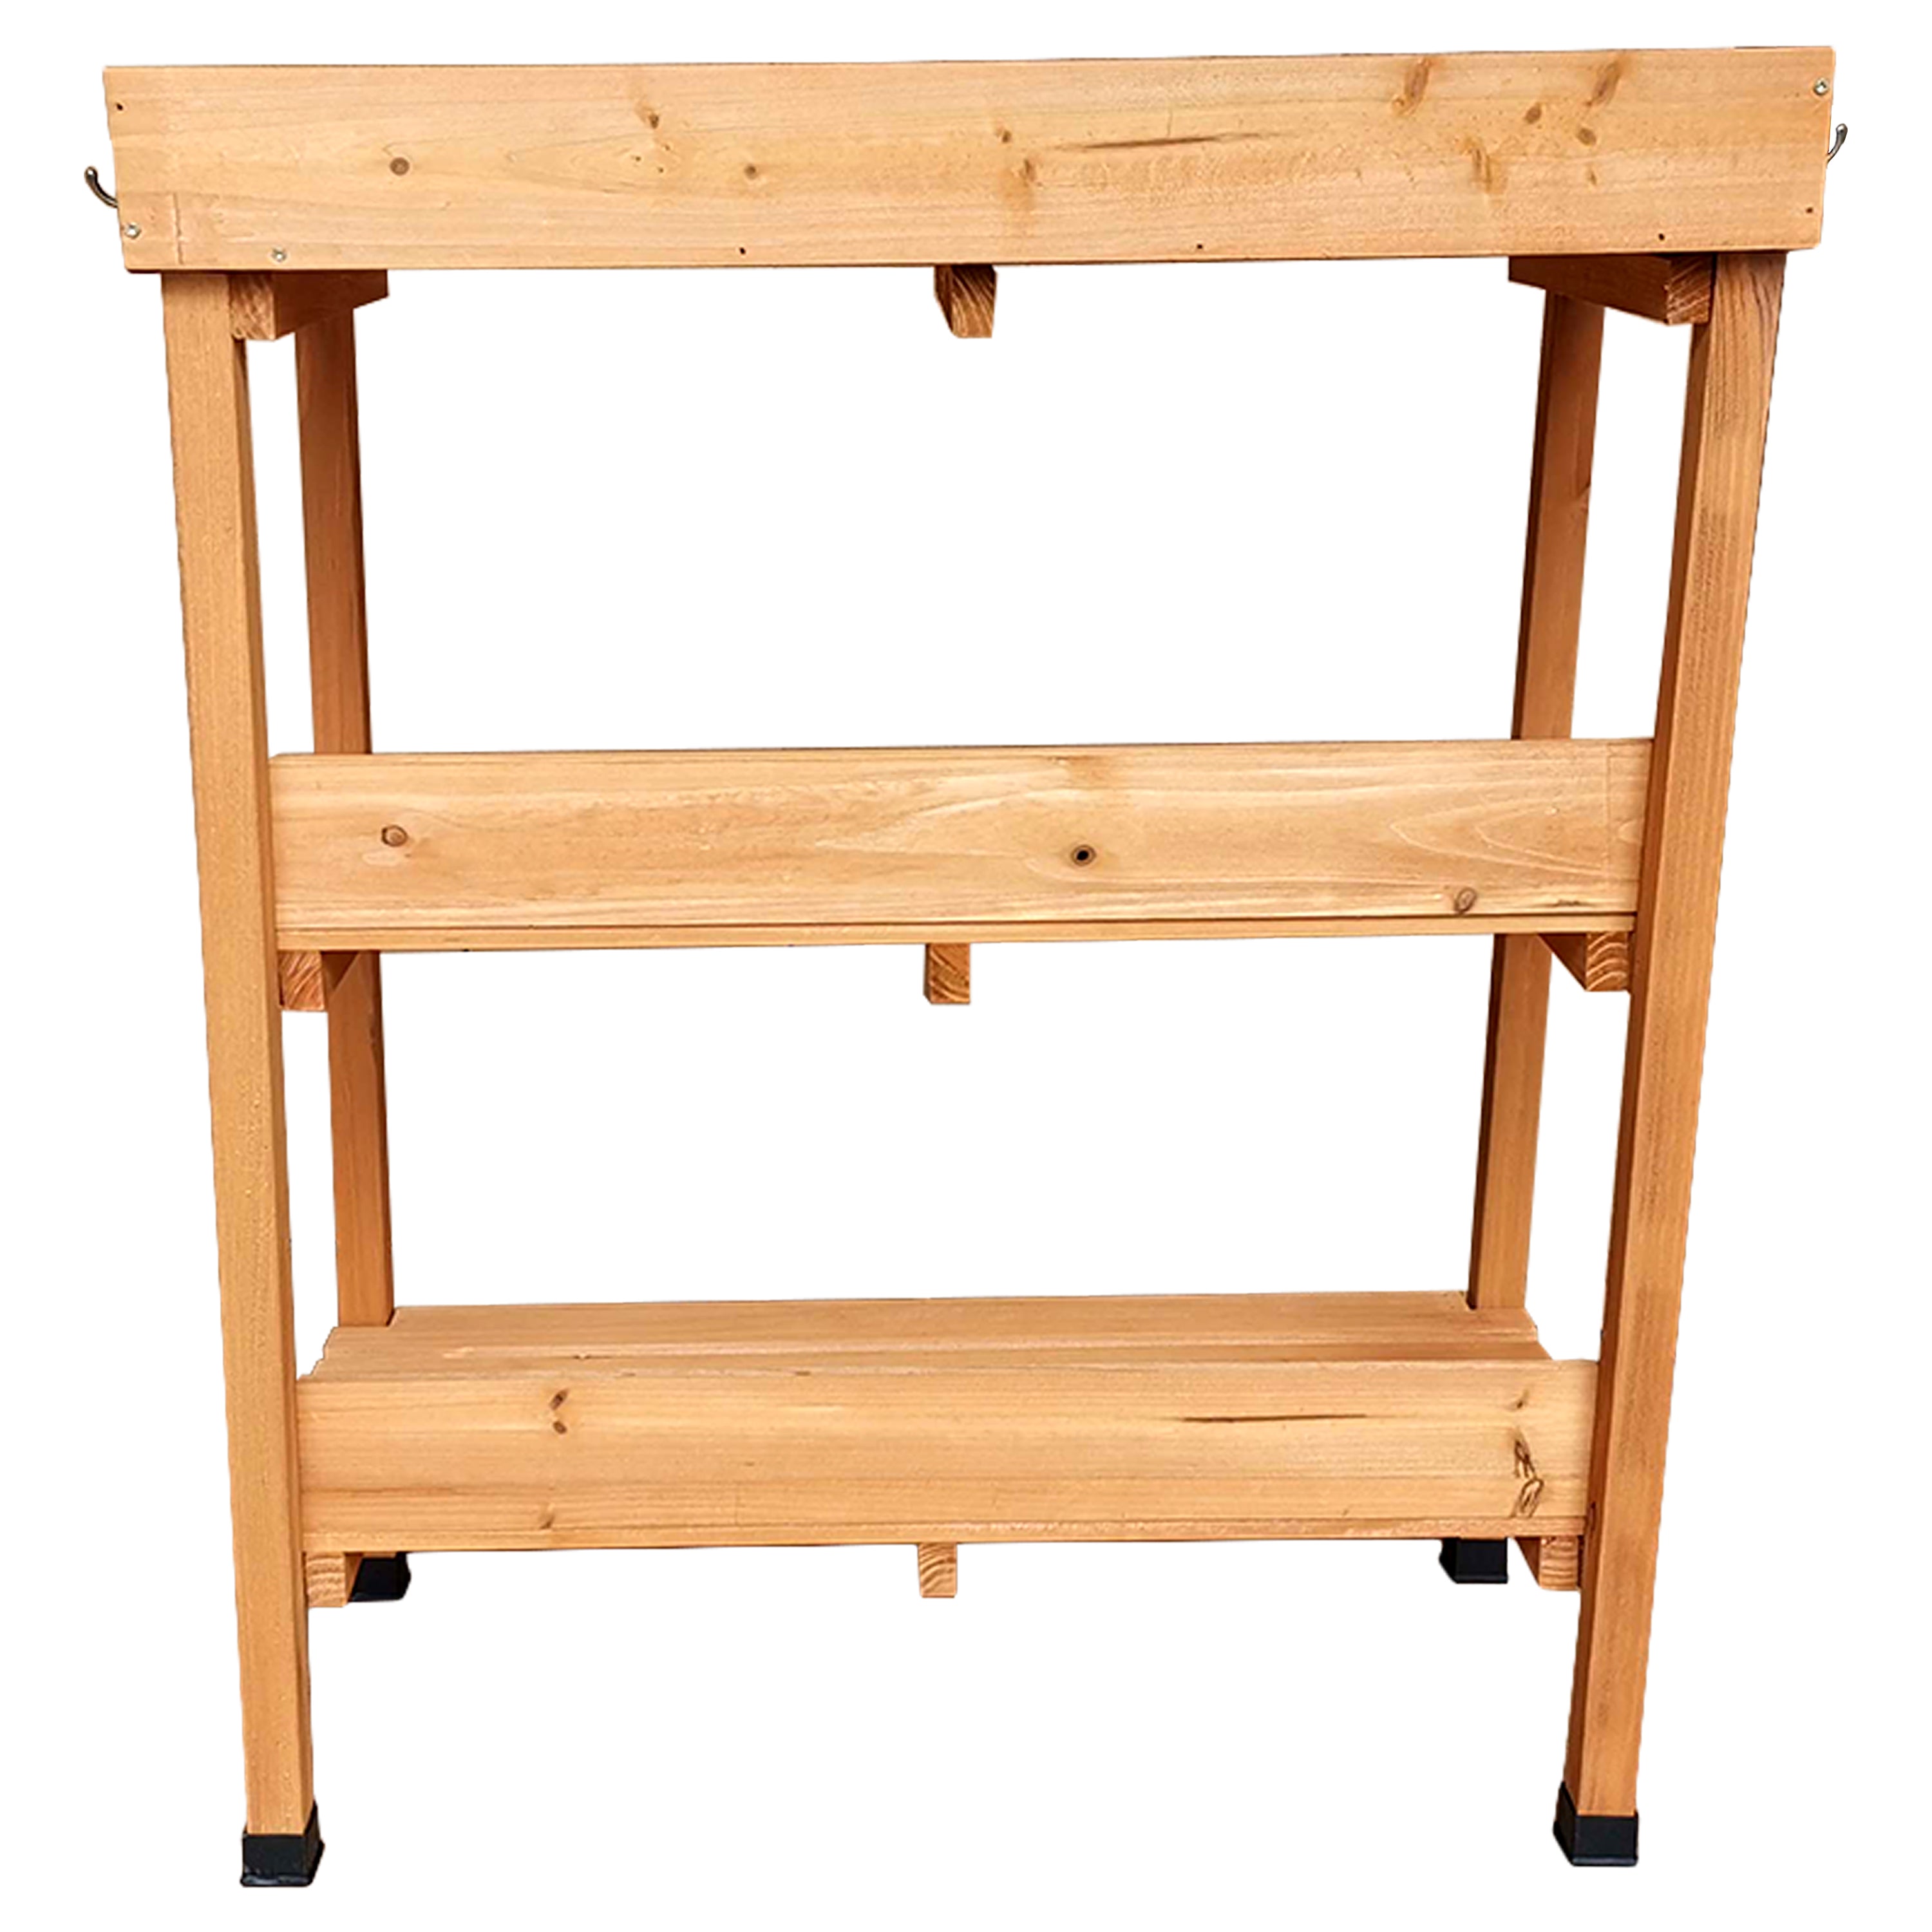 Wooden Practical Planting Table GEEZY - The Magic Toy Shop